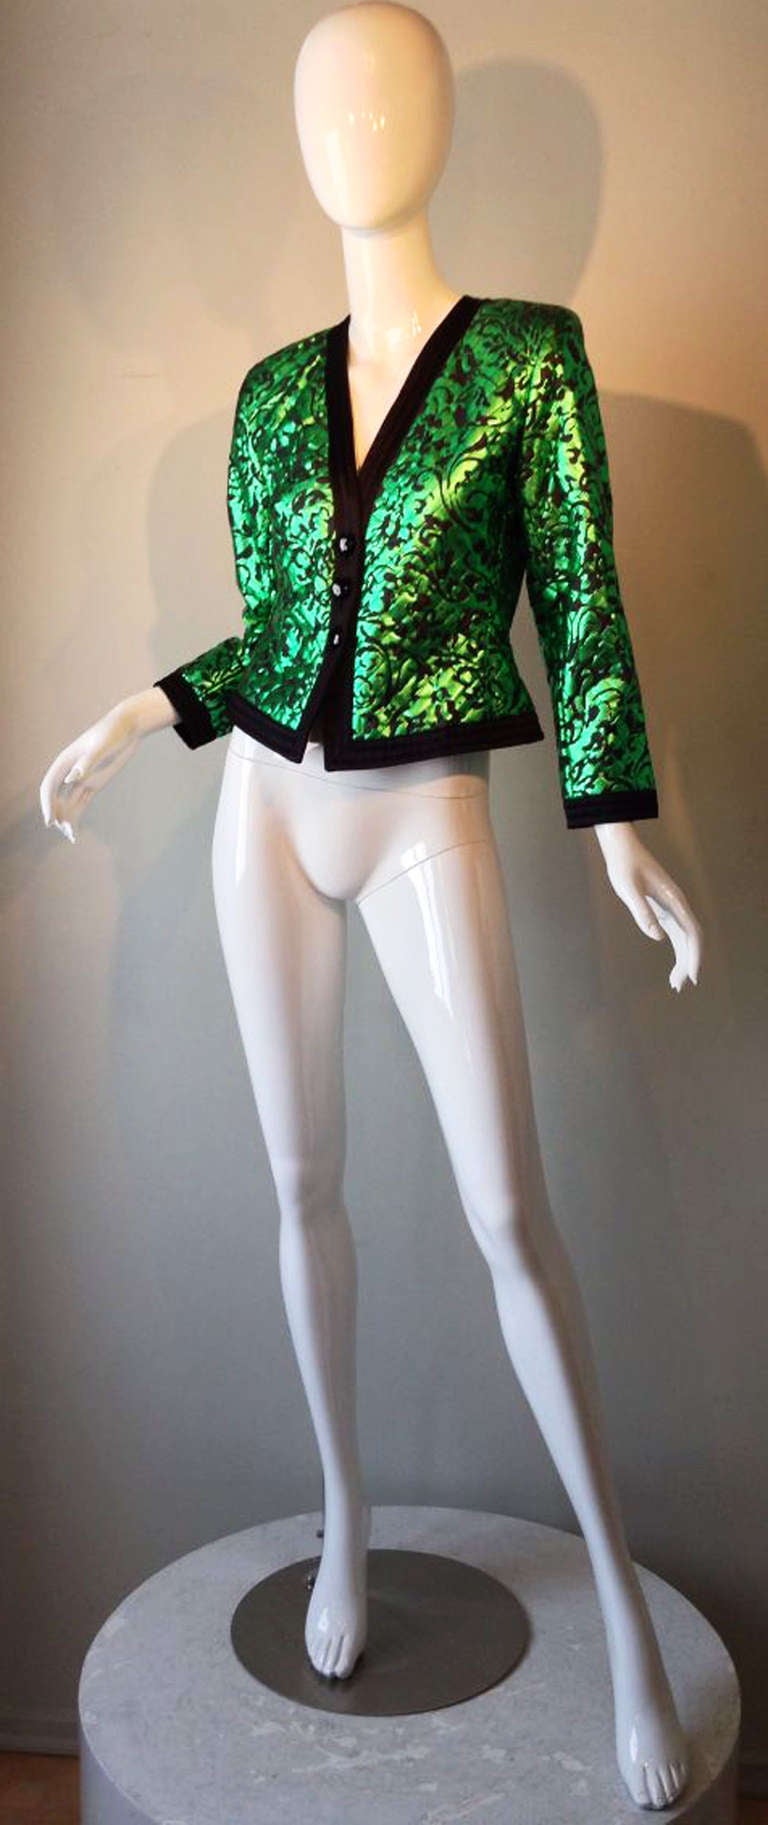 A fine vintage Yves Saint Laurent quilted evening smoking jacket. Exquisite green and black quilted silk printed fabric item trimmed in black silk. Item fully lined and jet glass button front closures. Pristine, perhaps unworn.